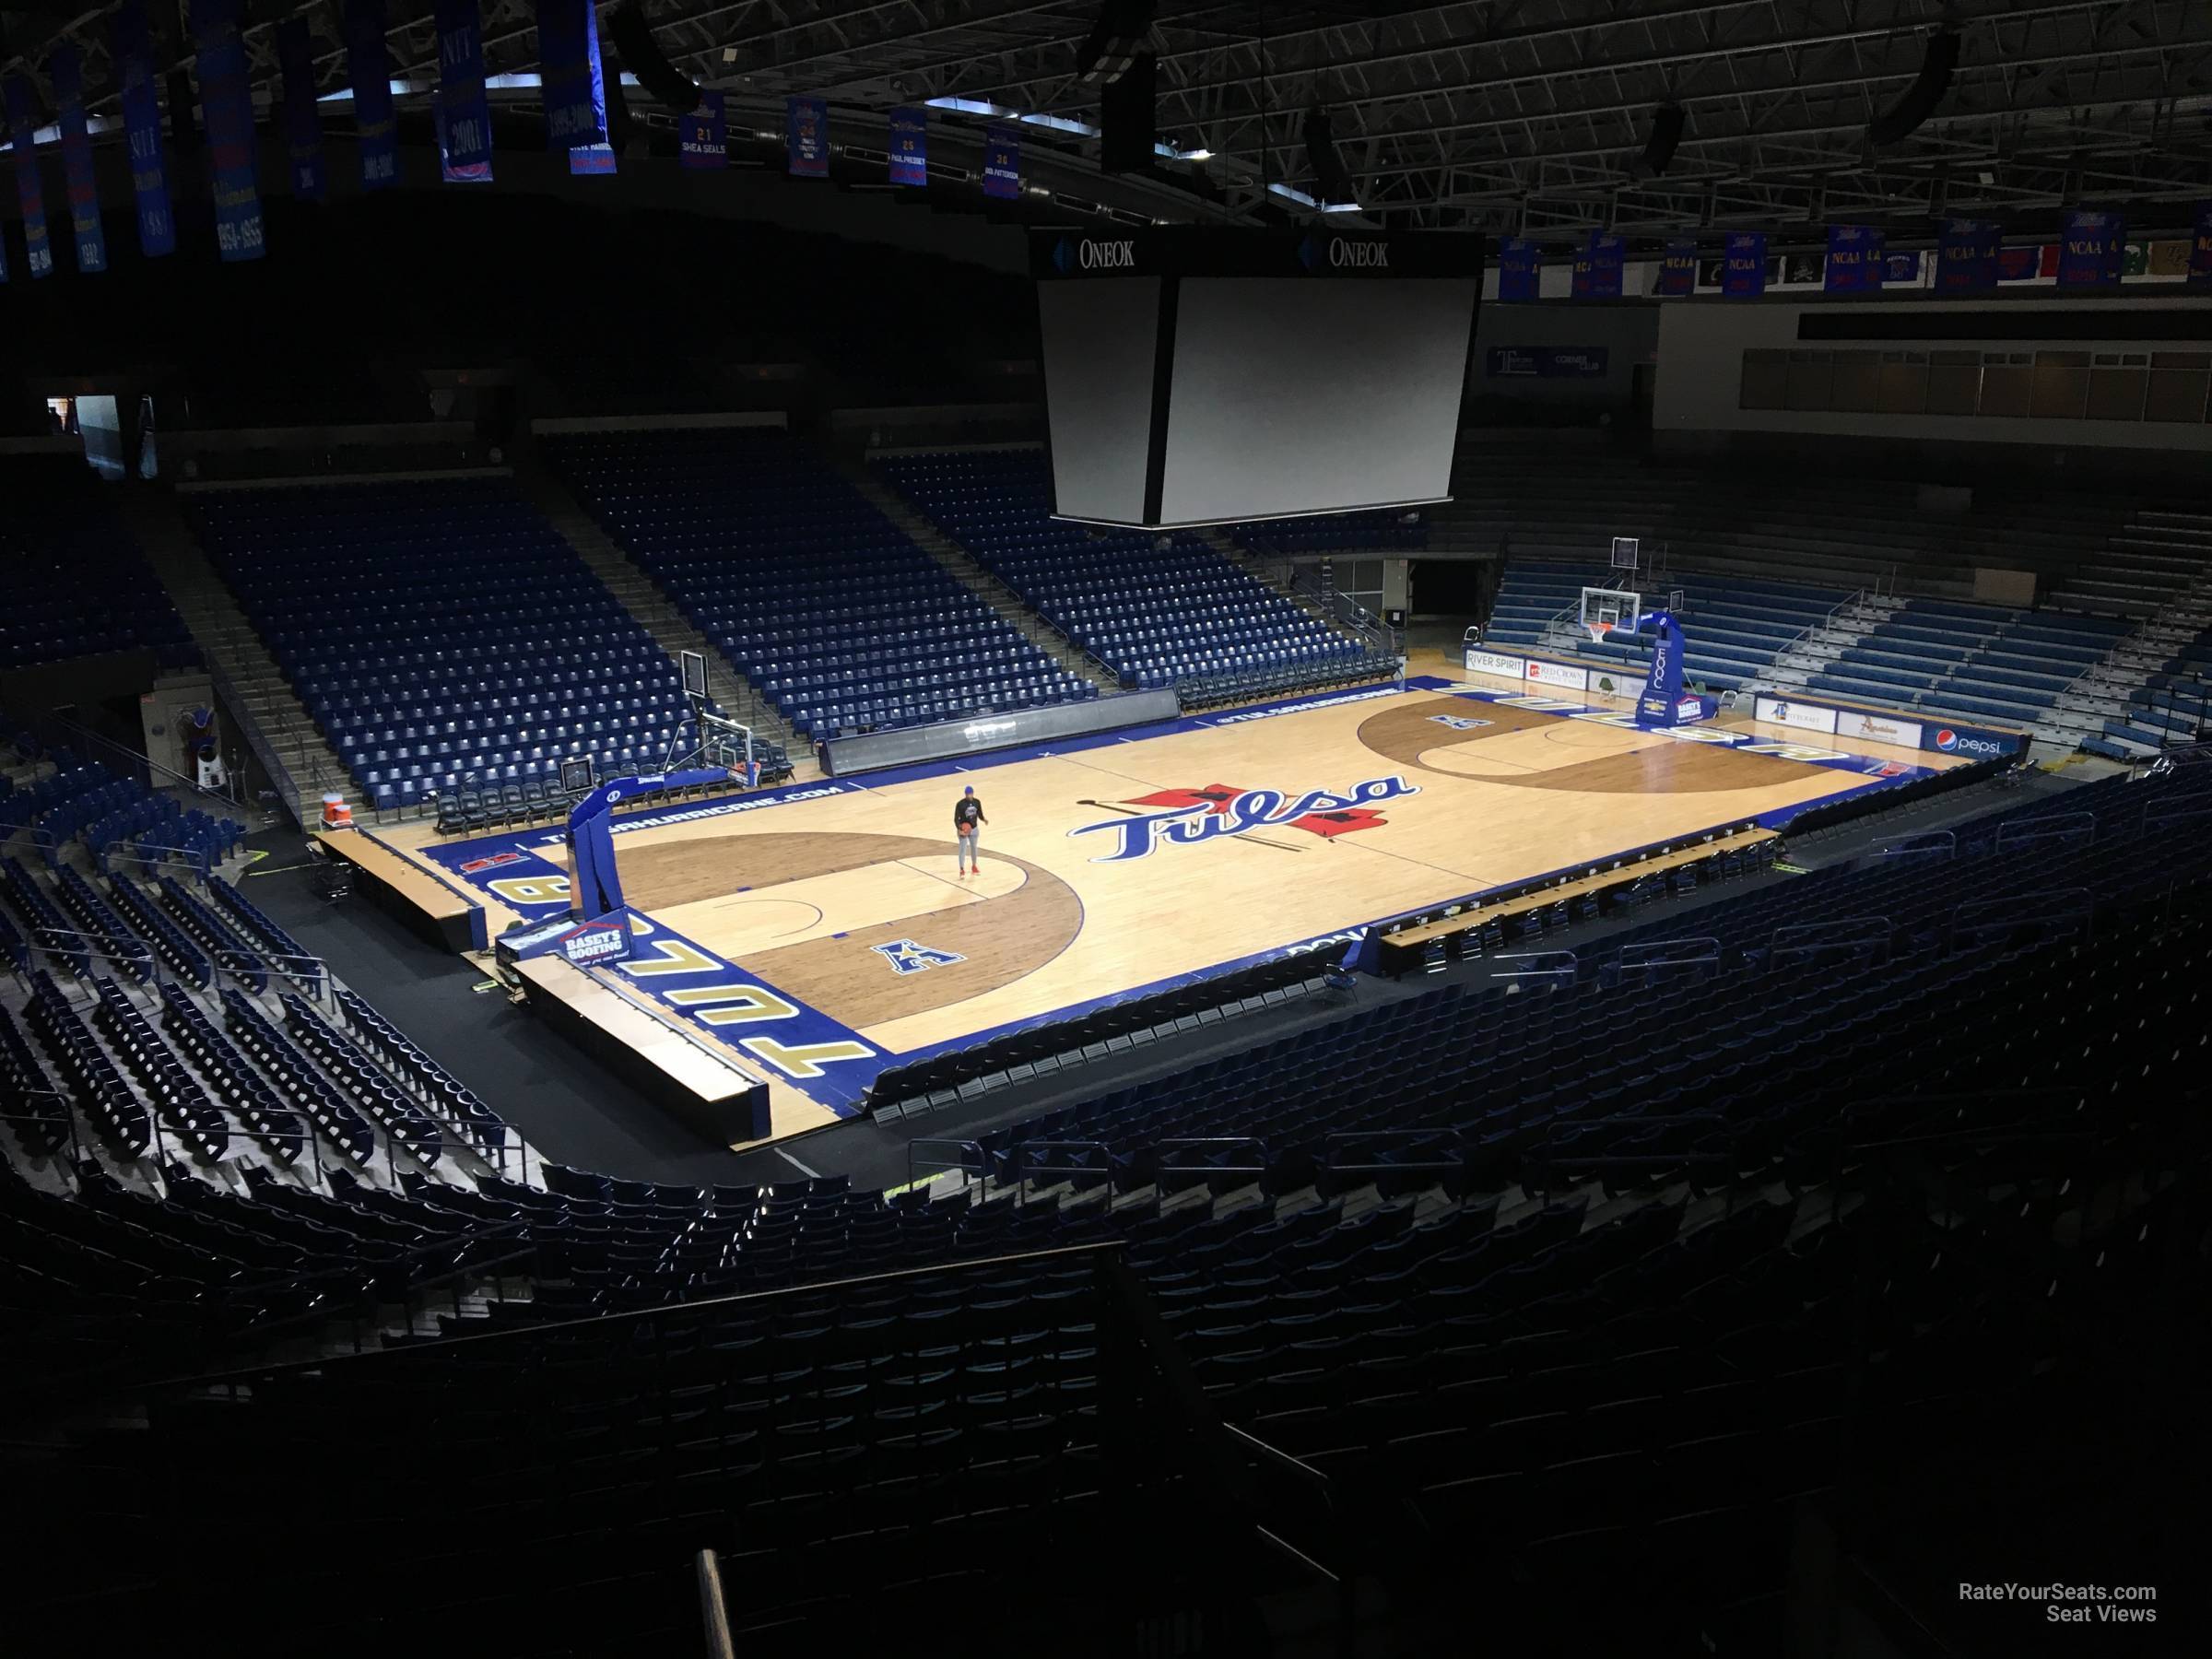 section 217, row d seat view  - reynolds center